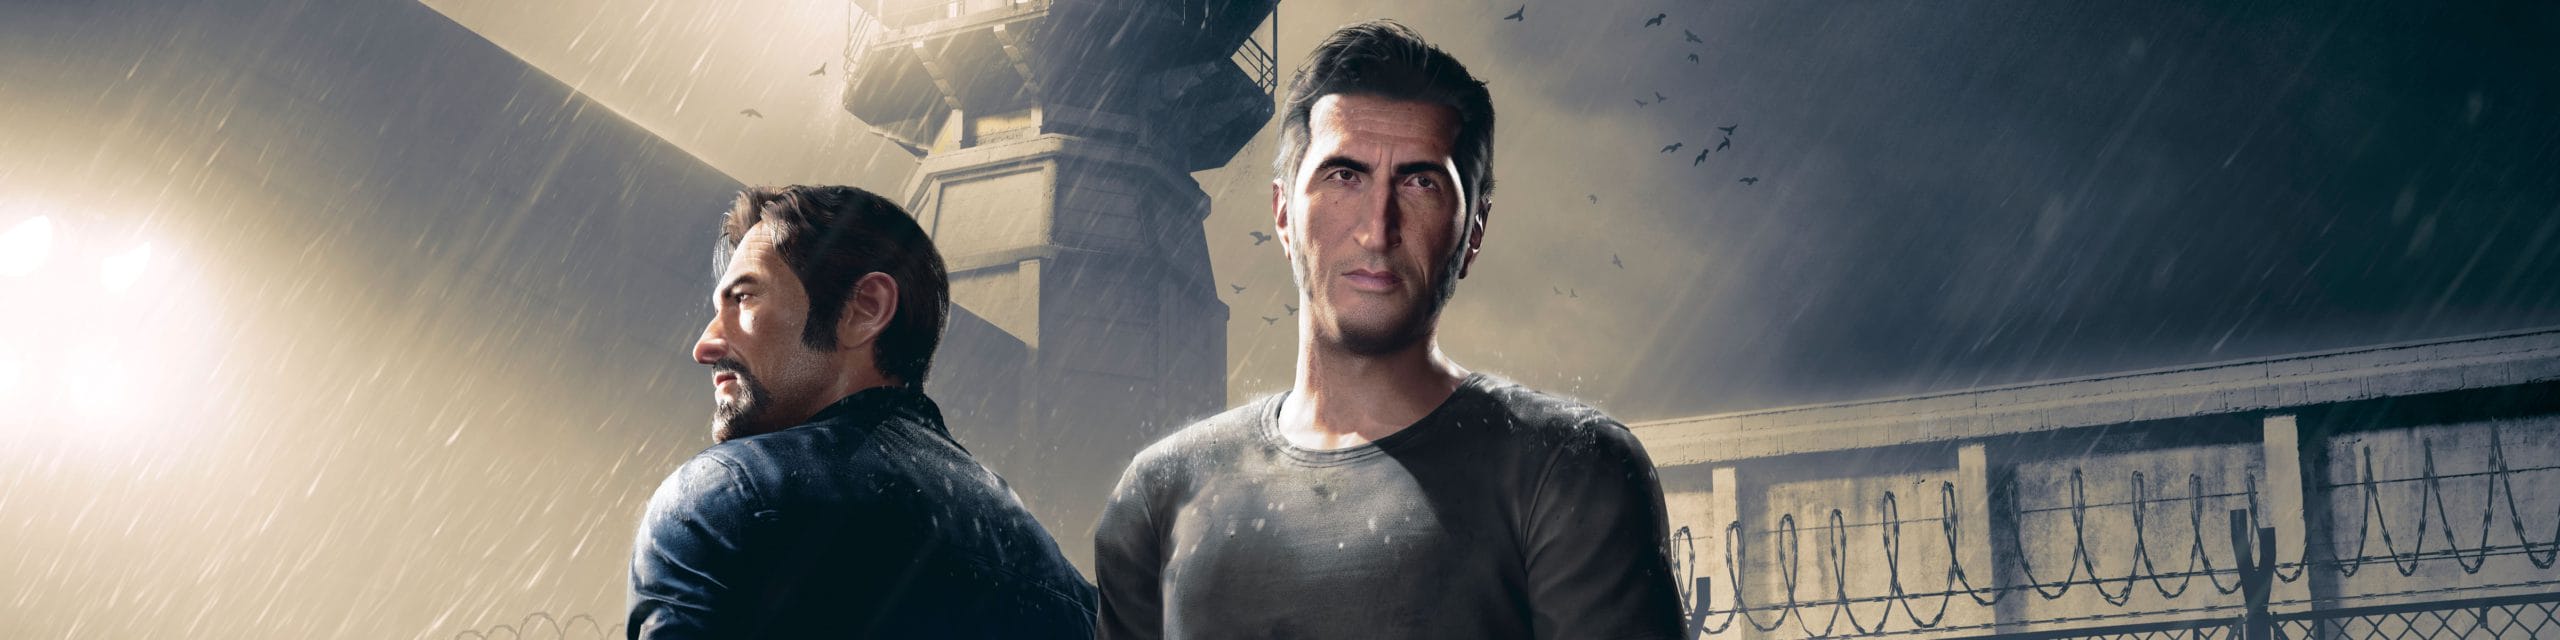 A Way Out Director's New Game To Be Announced Soon